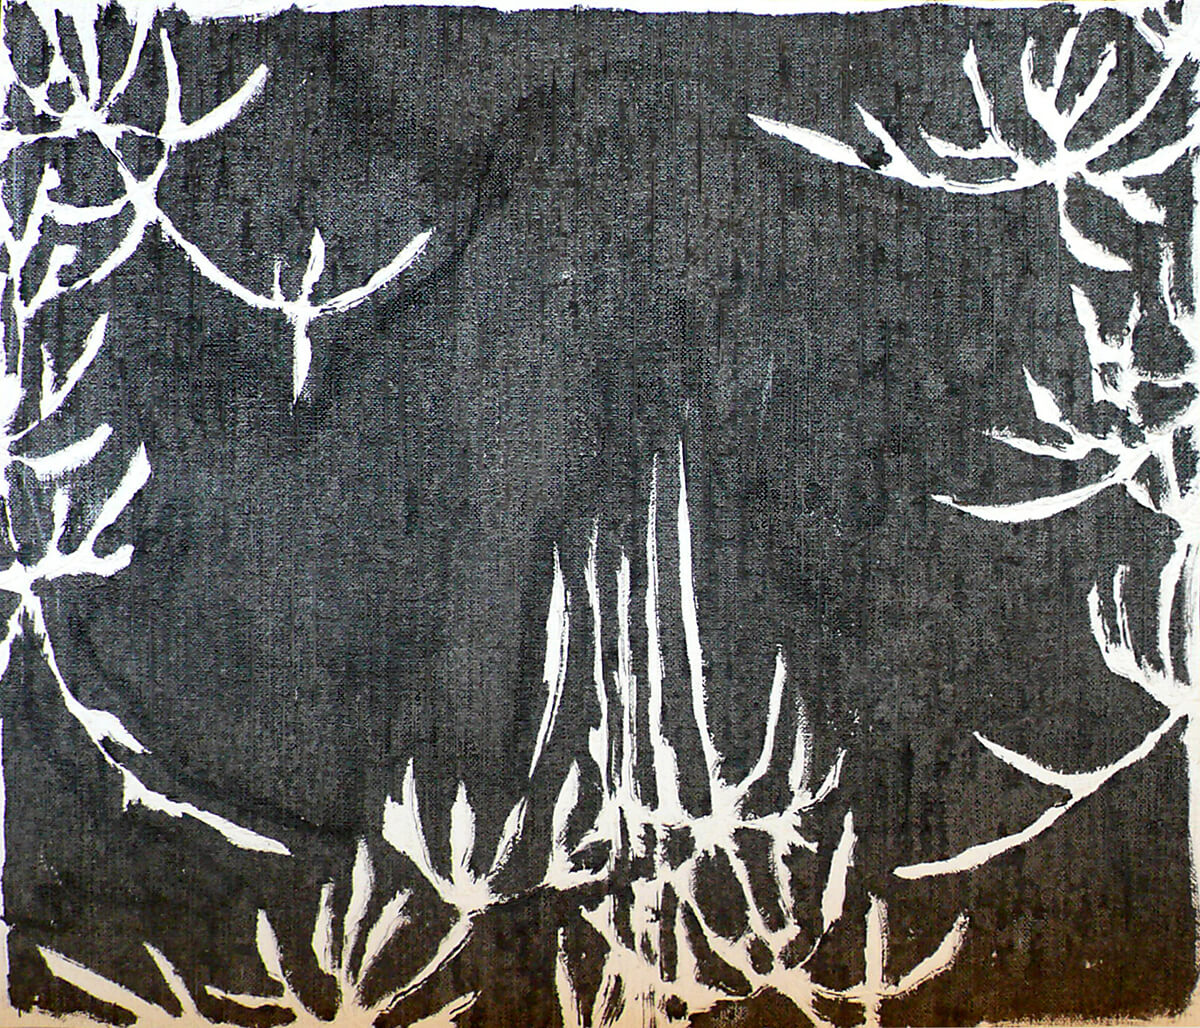 untitled (wallpaper), 39 x 46 cm, ink on paper, 2012